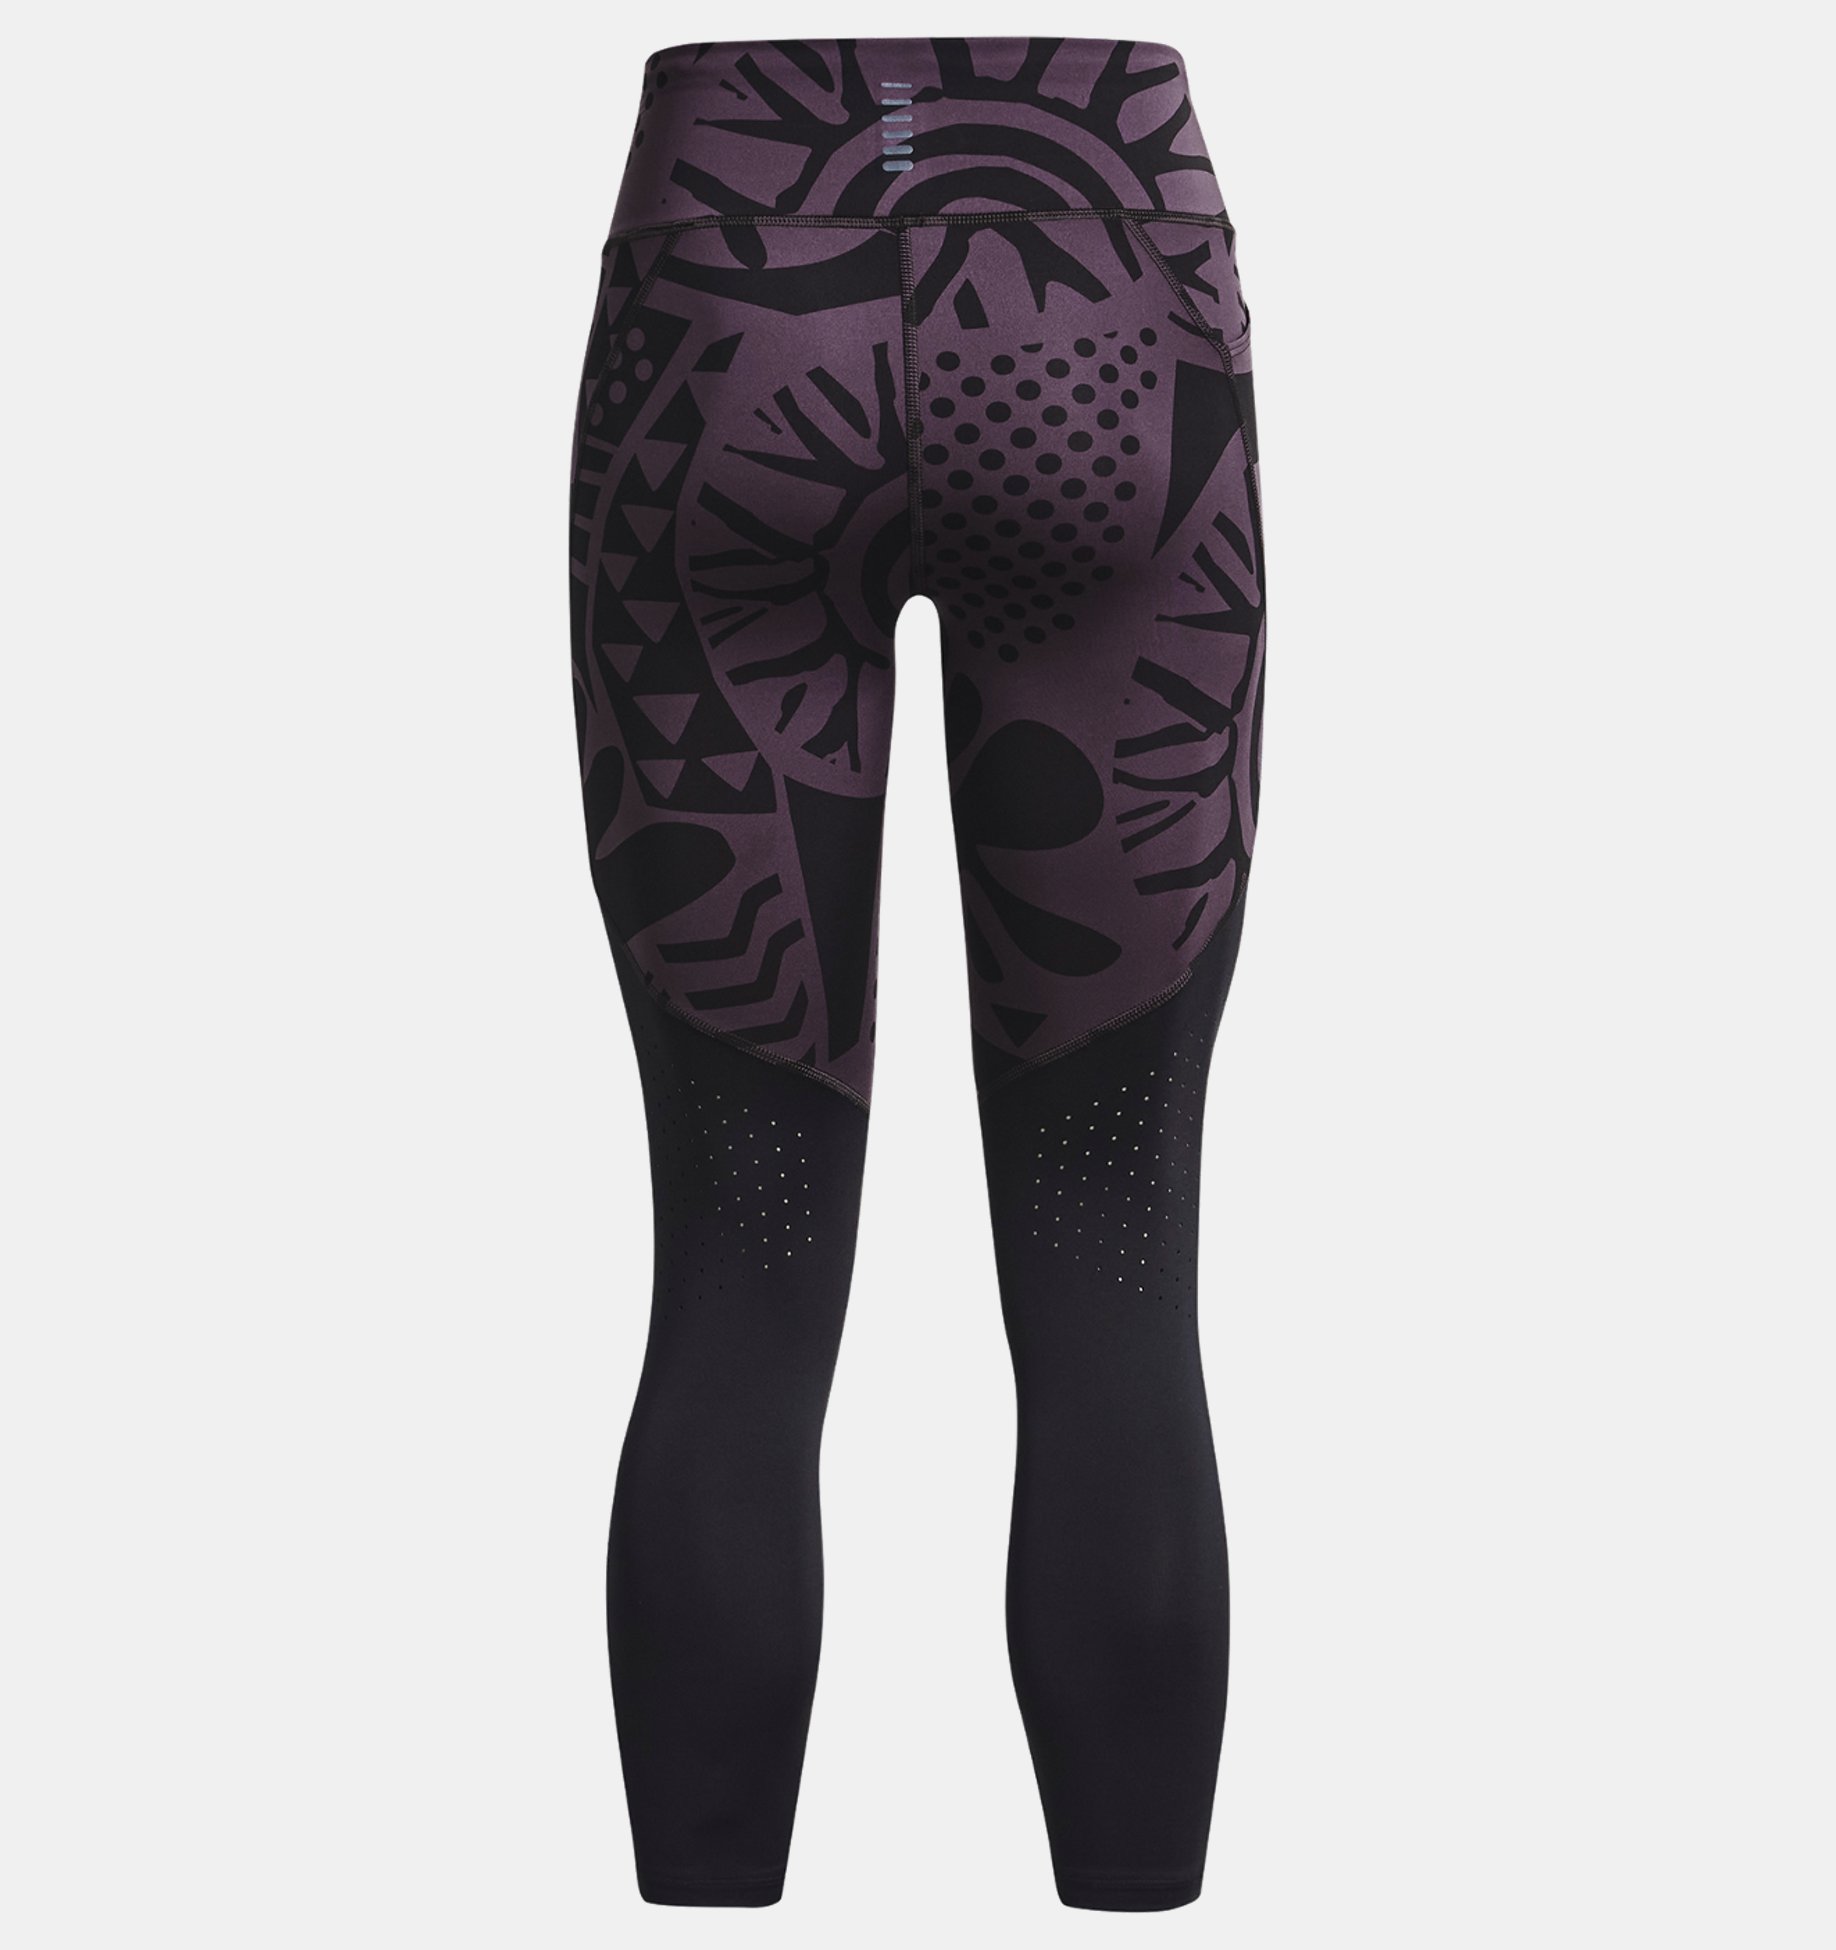 Women's UA Fly Fast 3.0 Printed Ankle Tights